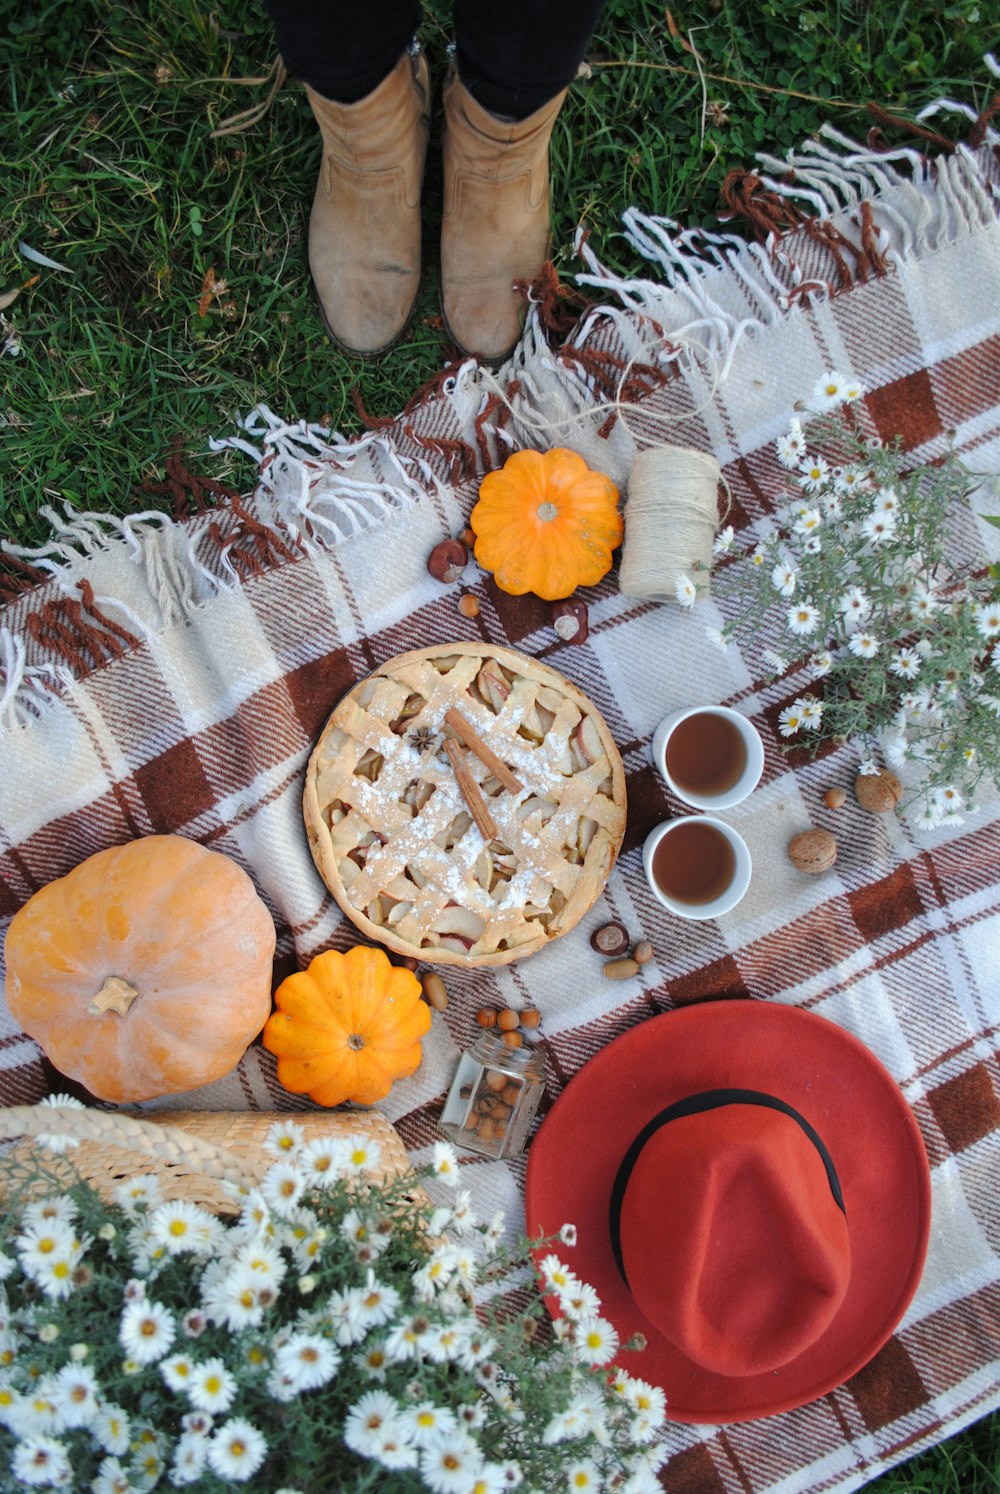 pie beside pumpkins, drinks, and hat on plaid textile